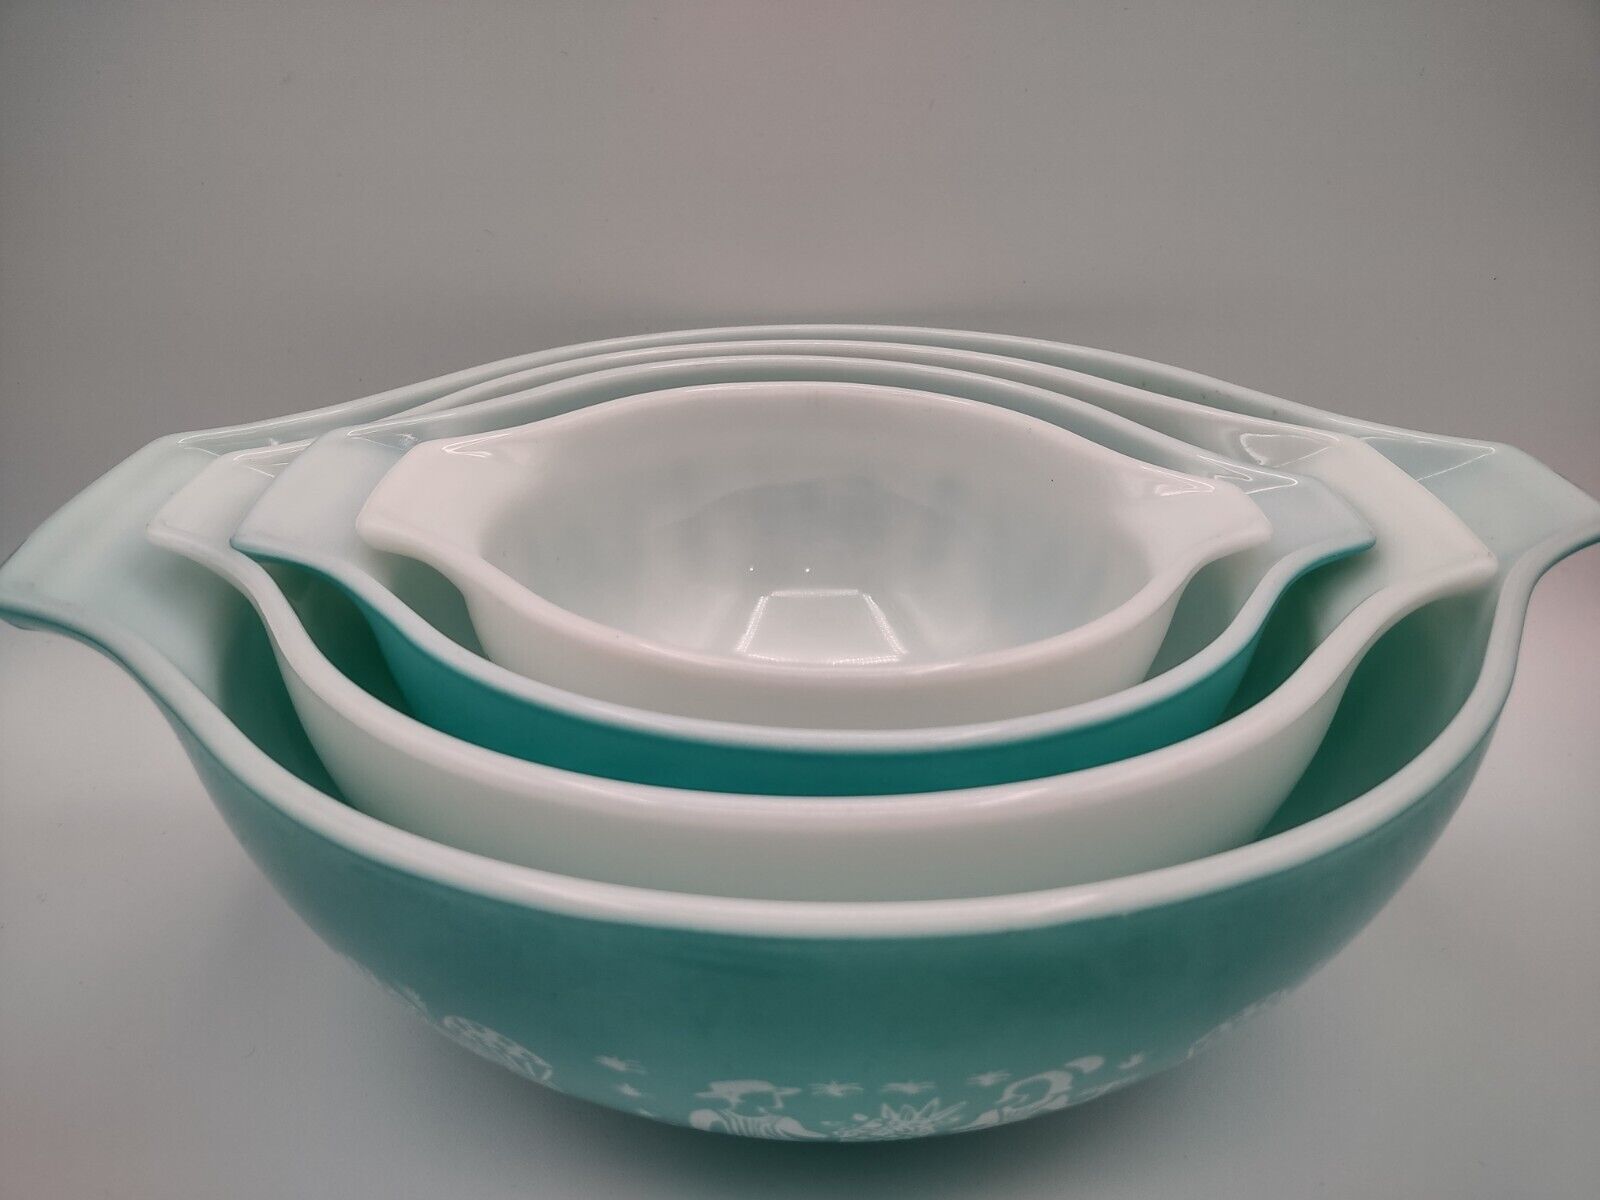 Vintage Pyrex Set of 4 Nesting Mixing Bowls Turquoise White Amish Butterprint